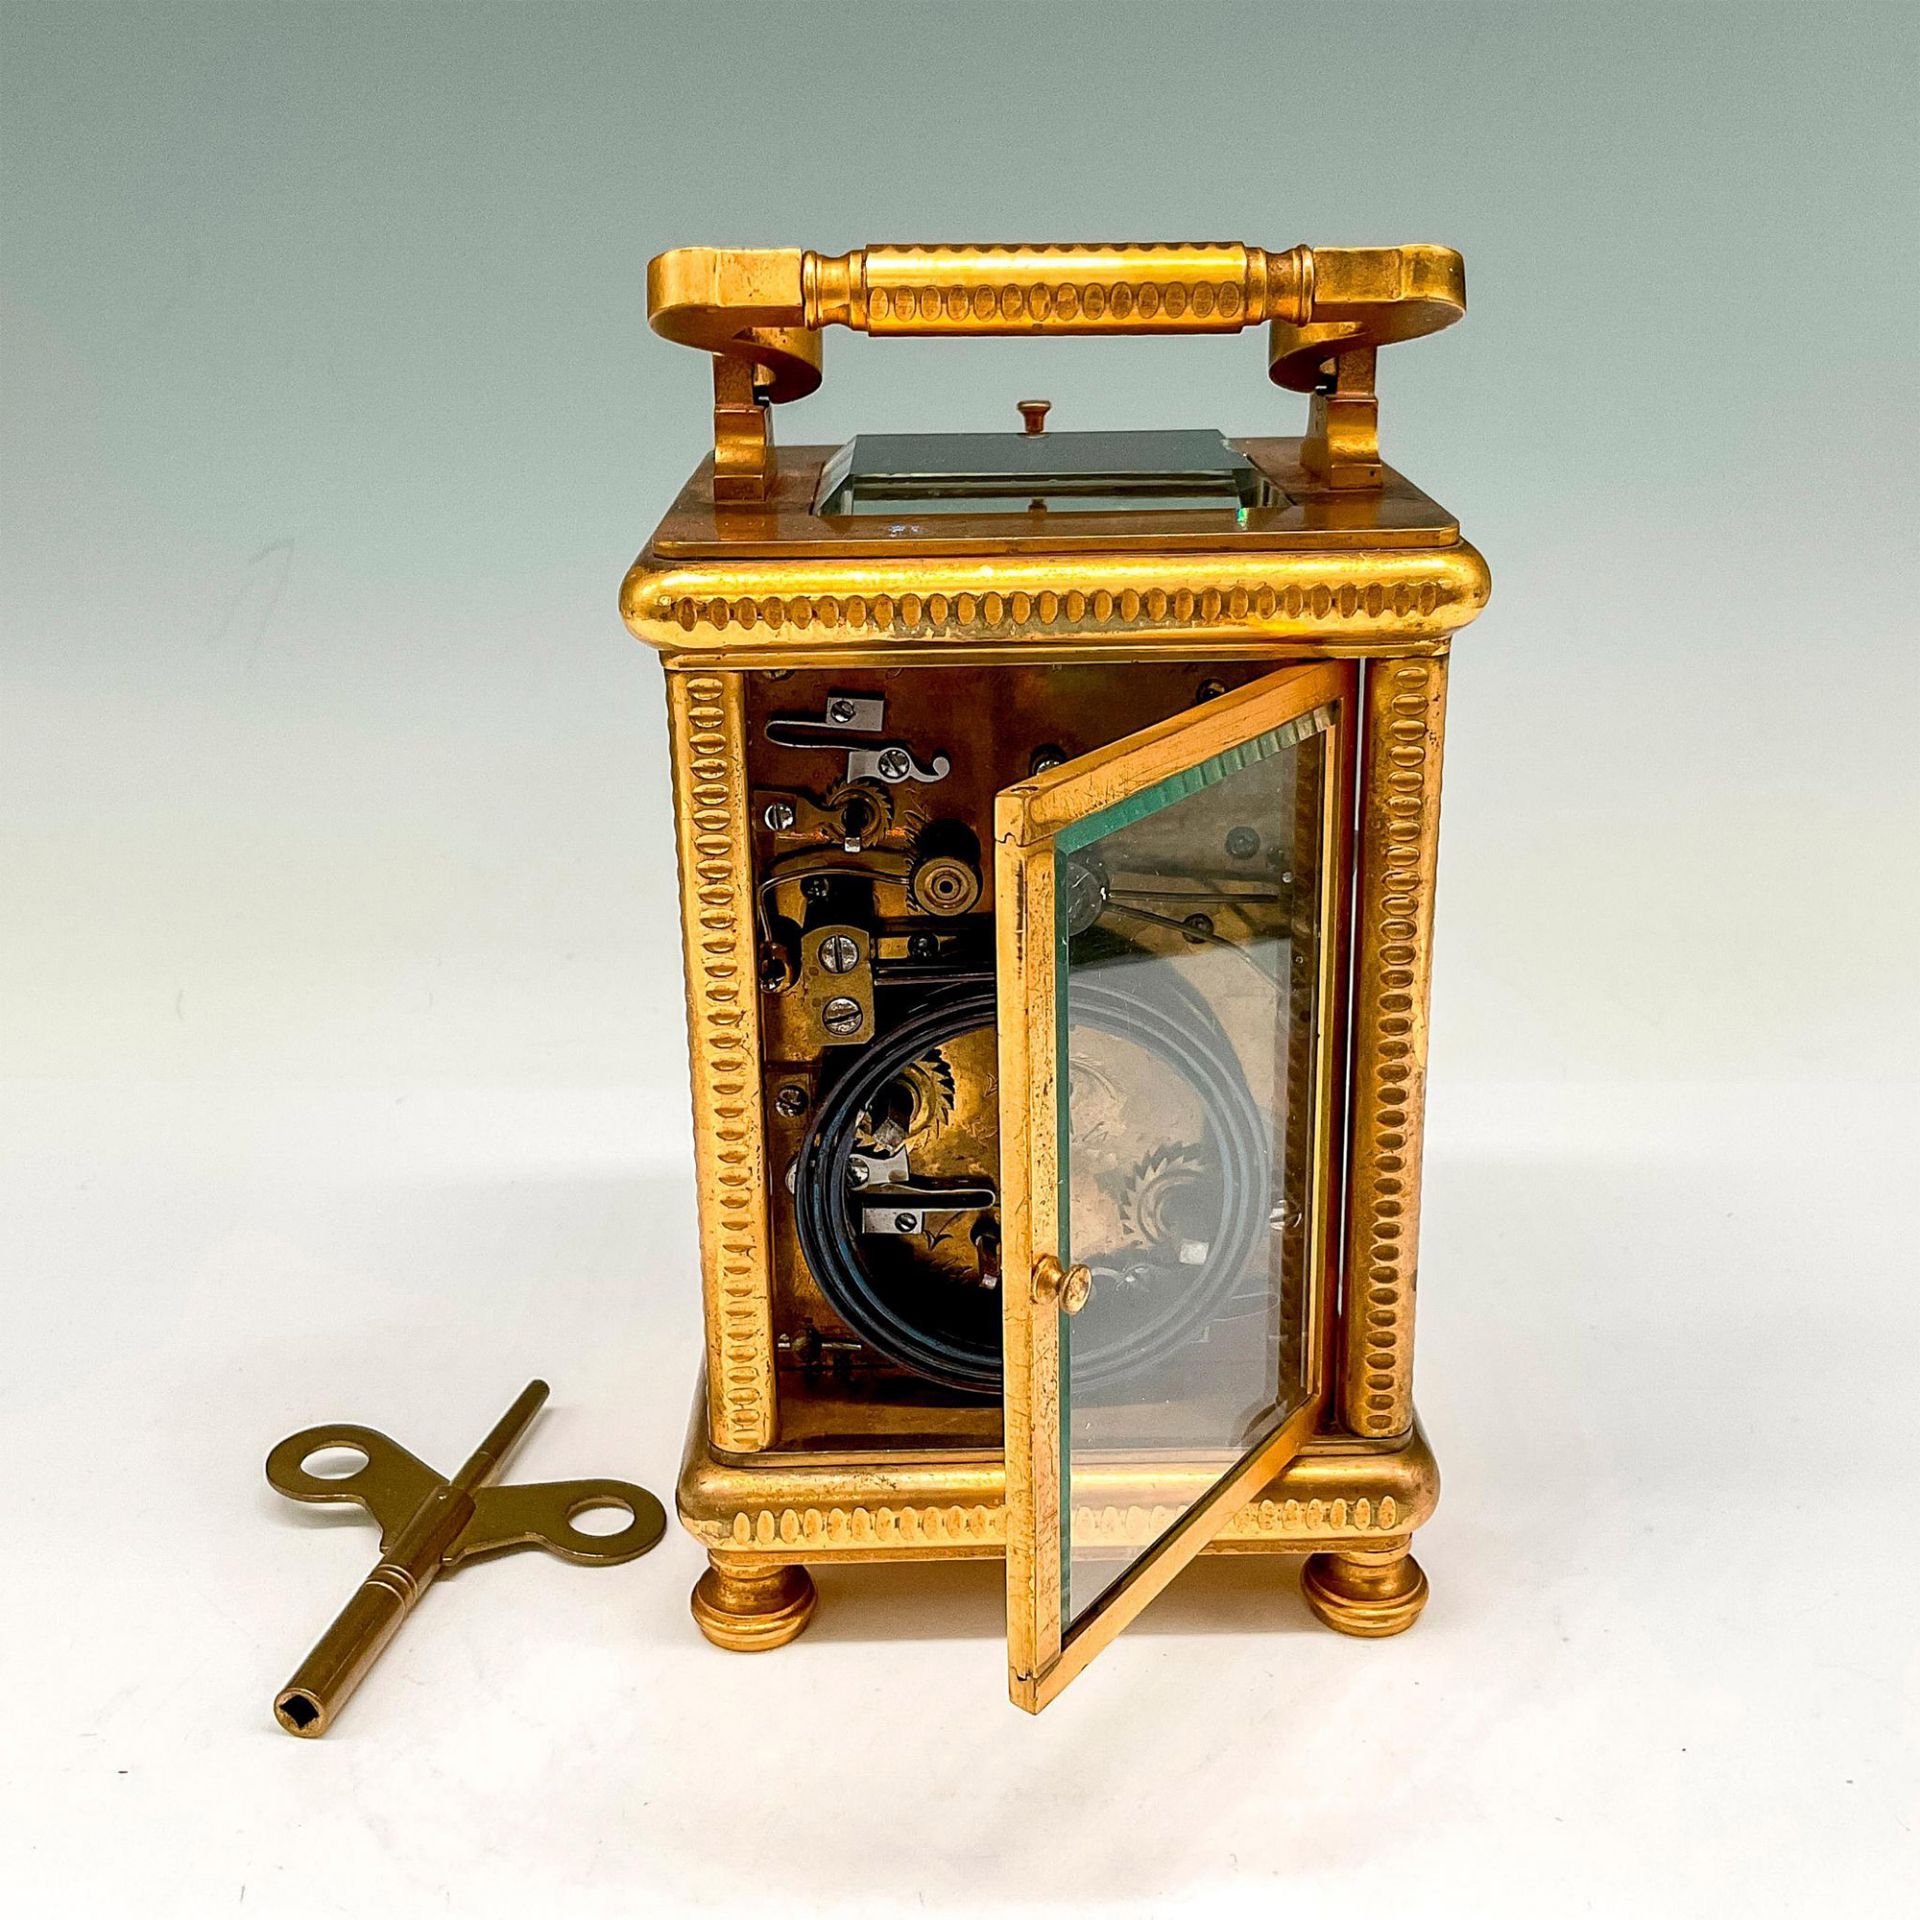 Antique Tiffany & Co. Brass Repeater Carriage Clock - Image 4 of 6